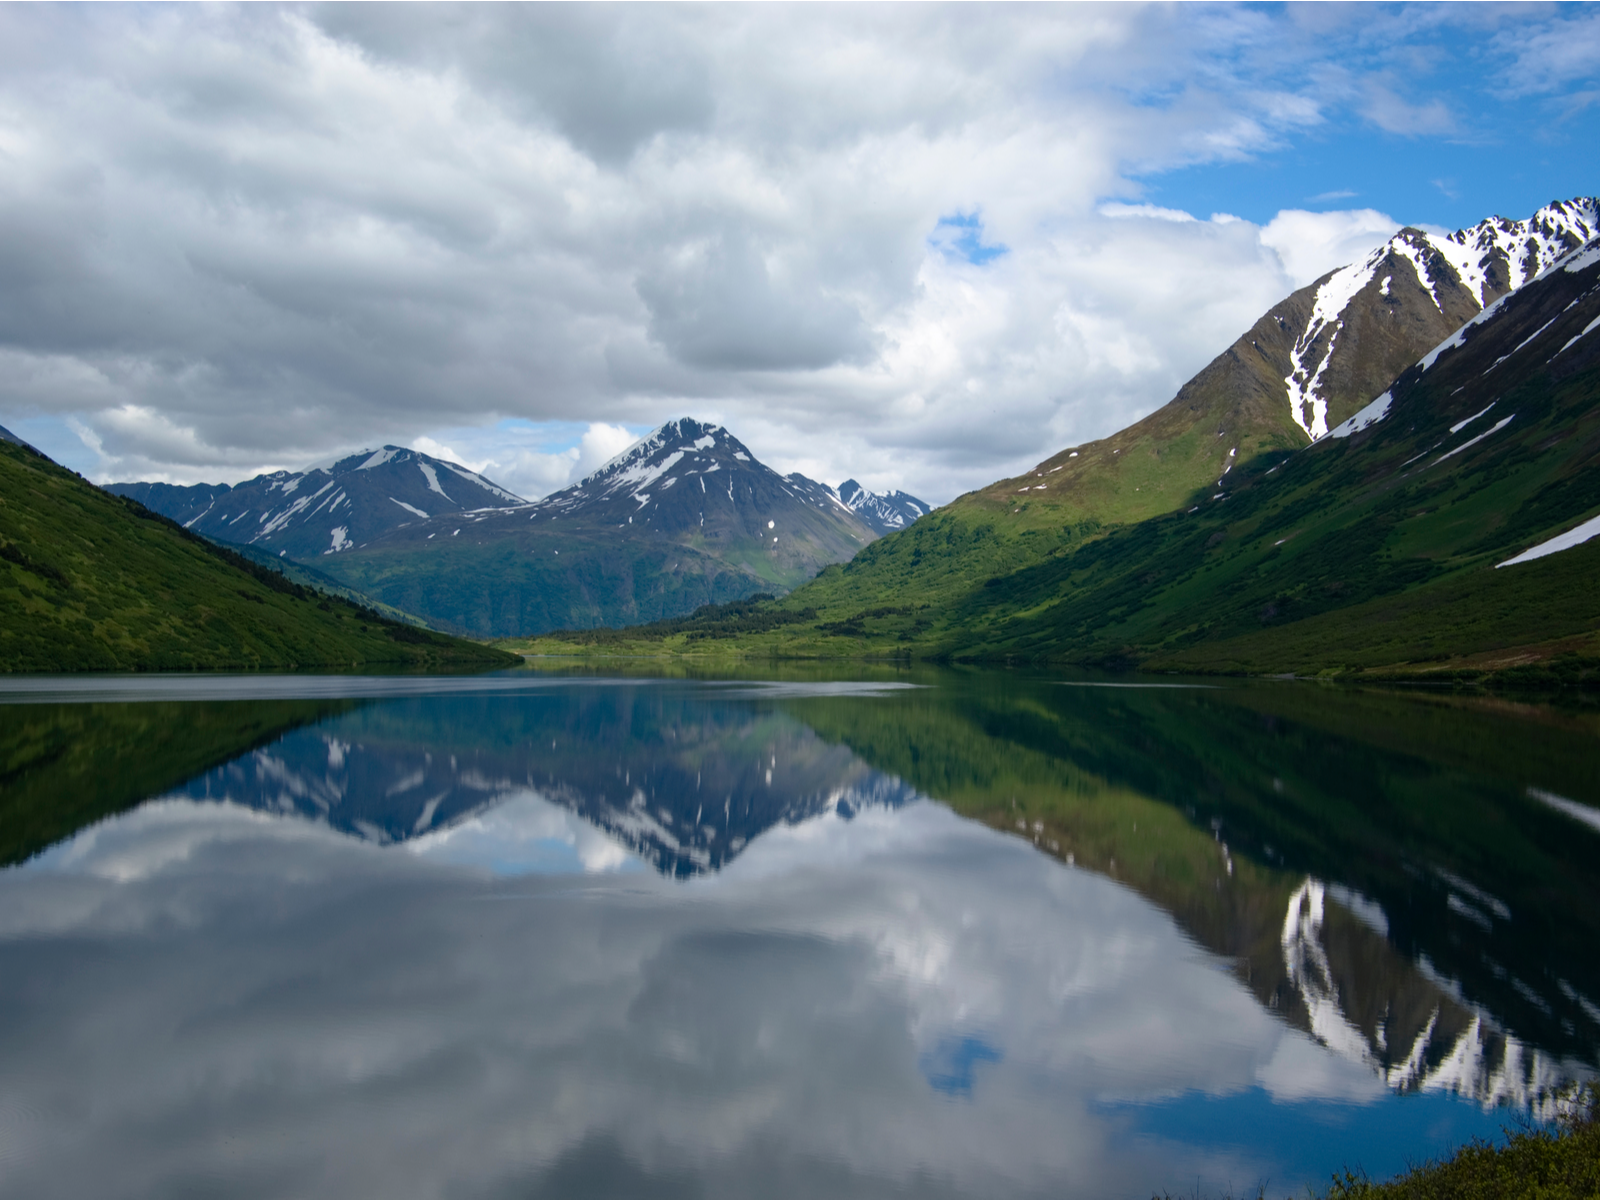 Thick white clouds and green snowy peak mountains reflected on the still water of Crescent Lake in Alaska, one of the best lakes in the U.S.